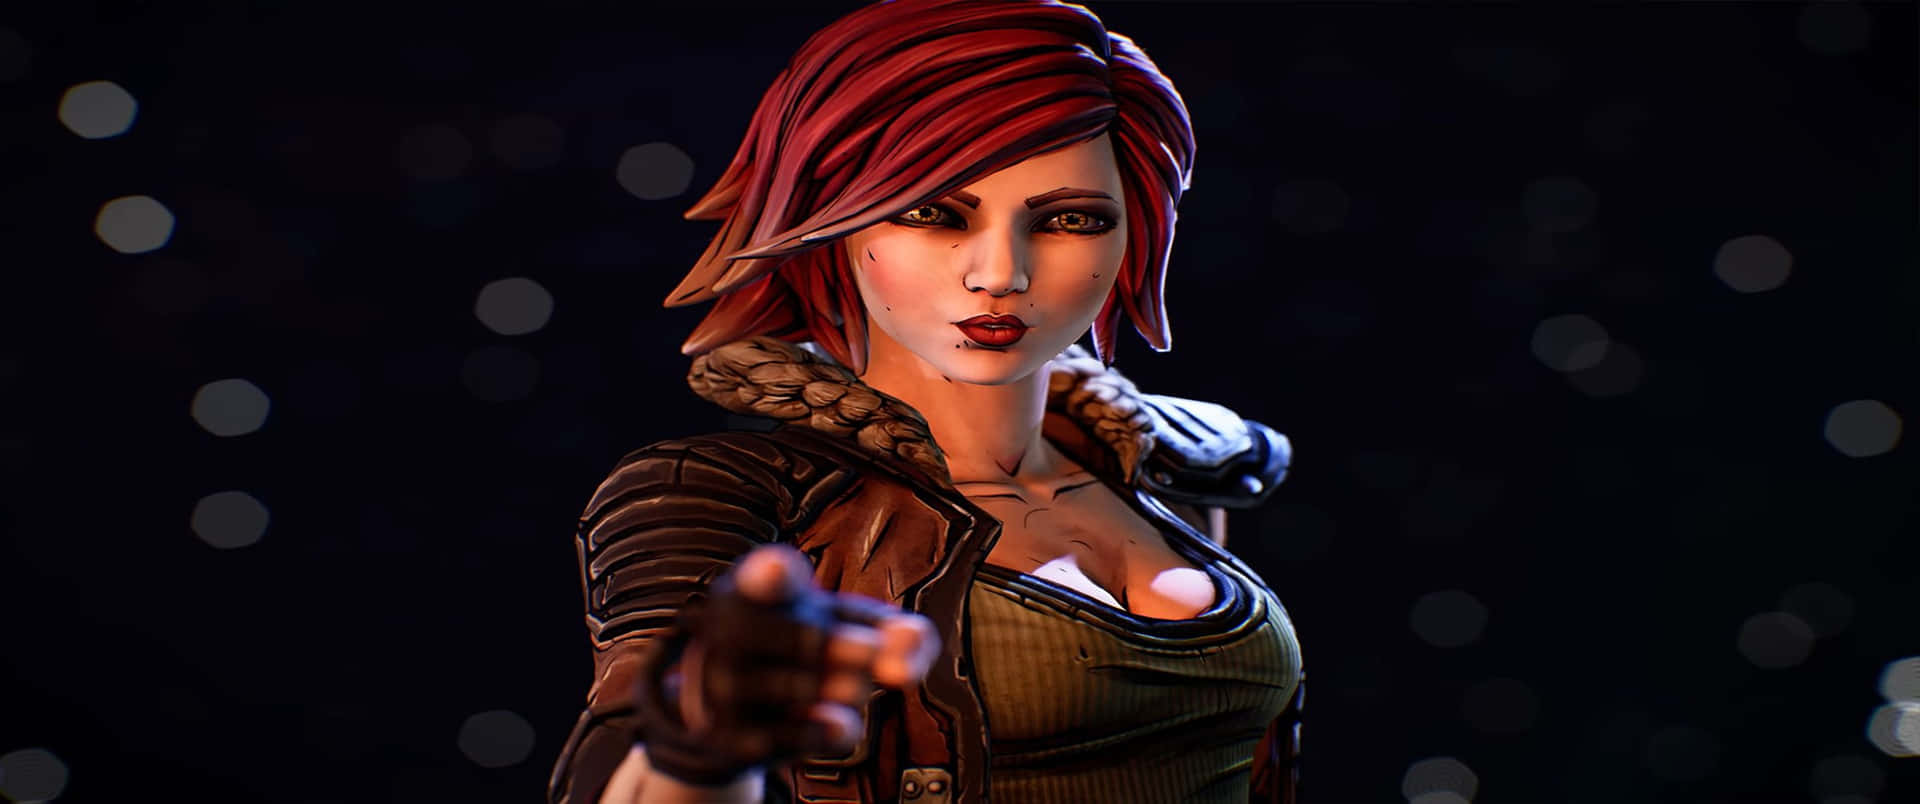 Pointing Lilith In 3440x1440p Borderlands 3 Background